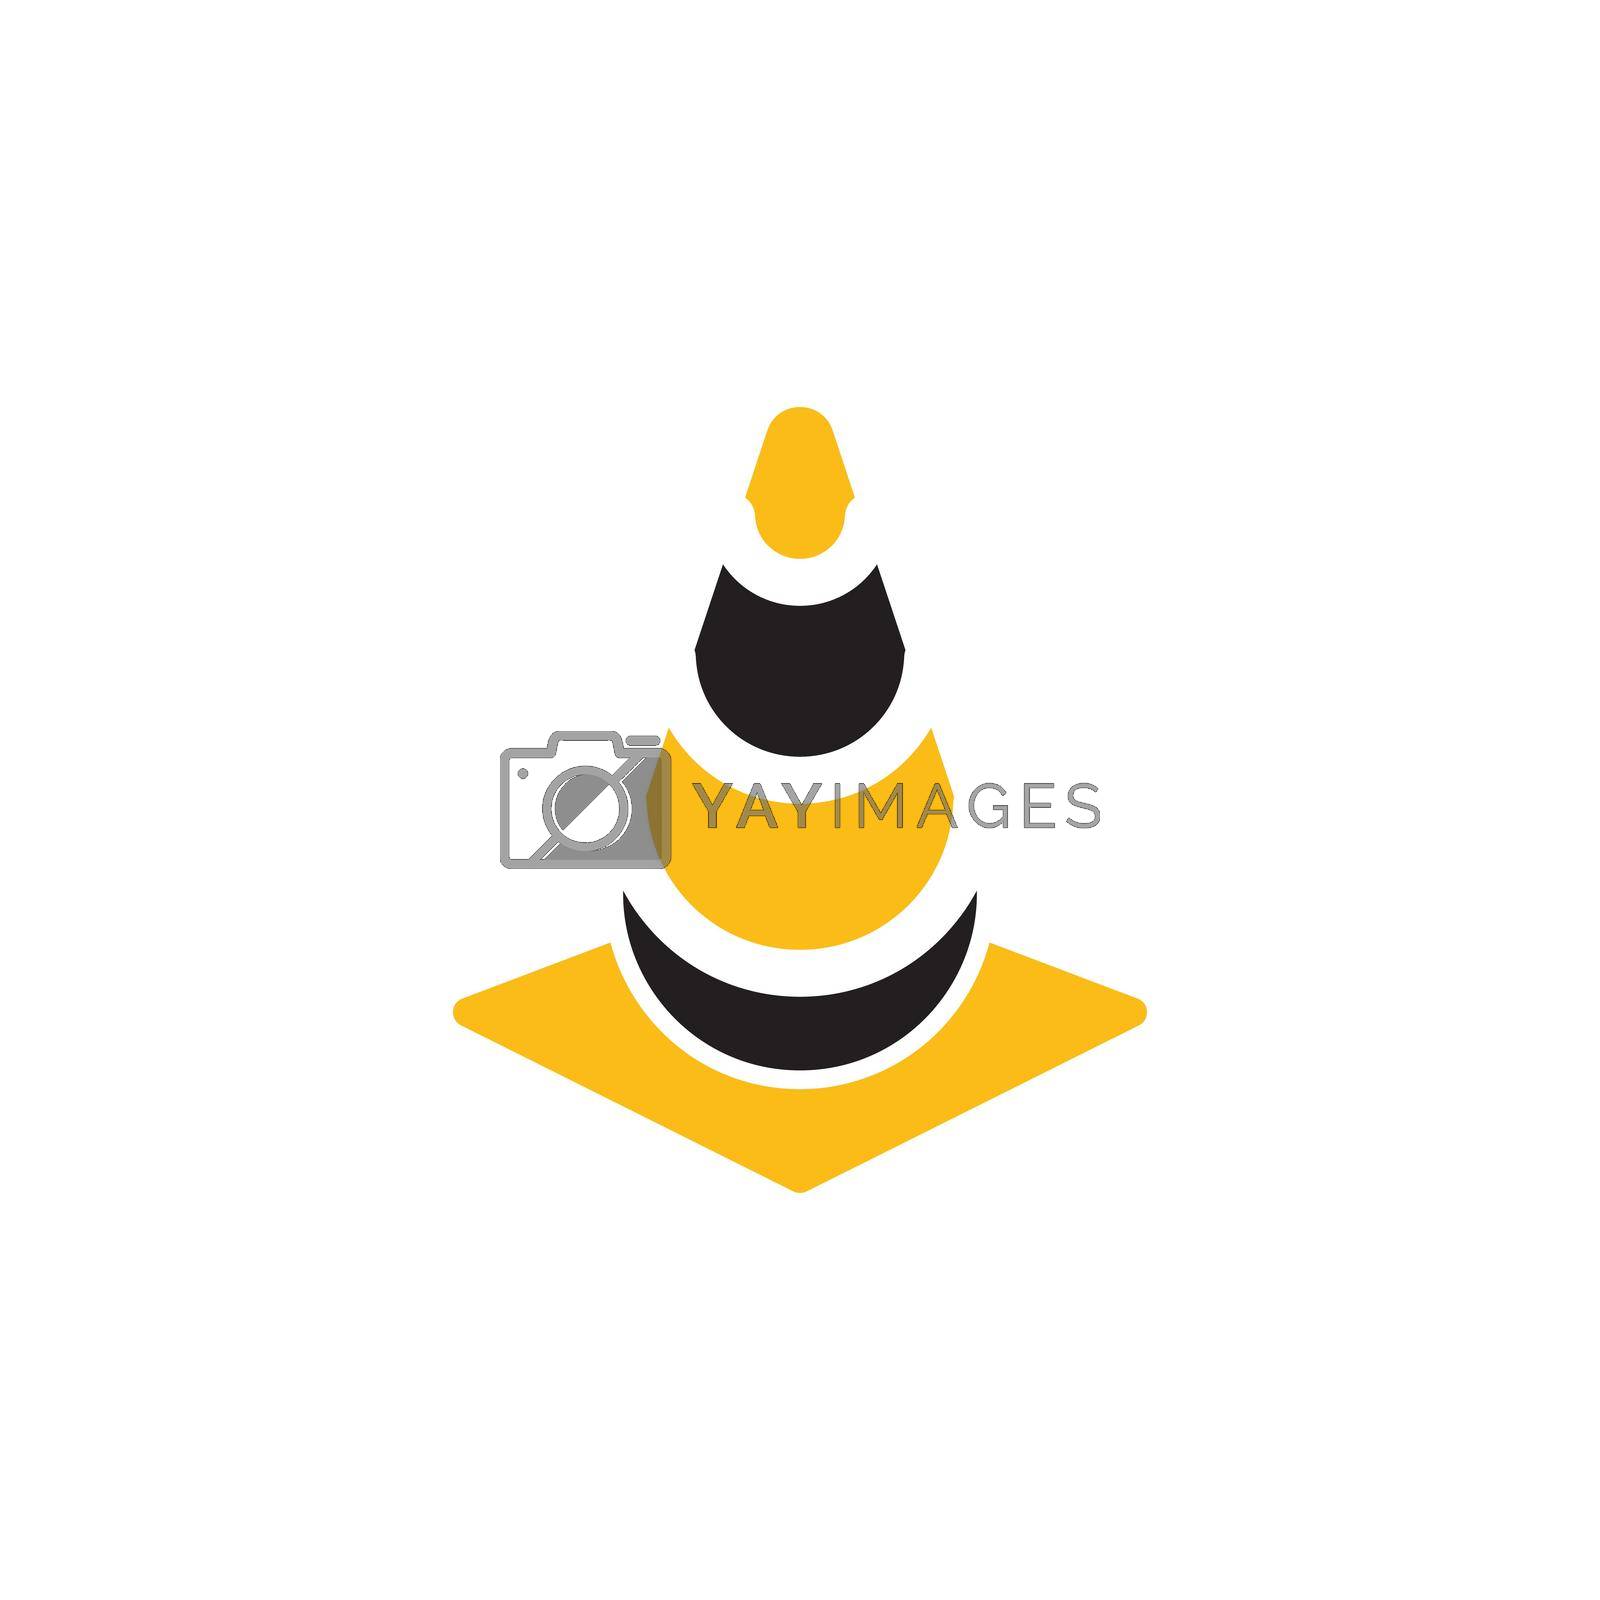 Royalty free image of cone icon logo by awk